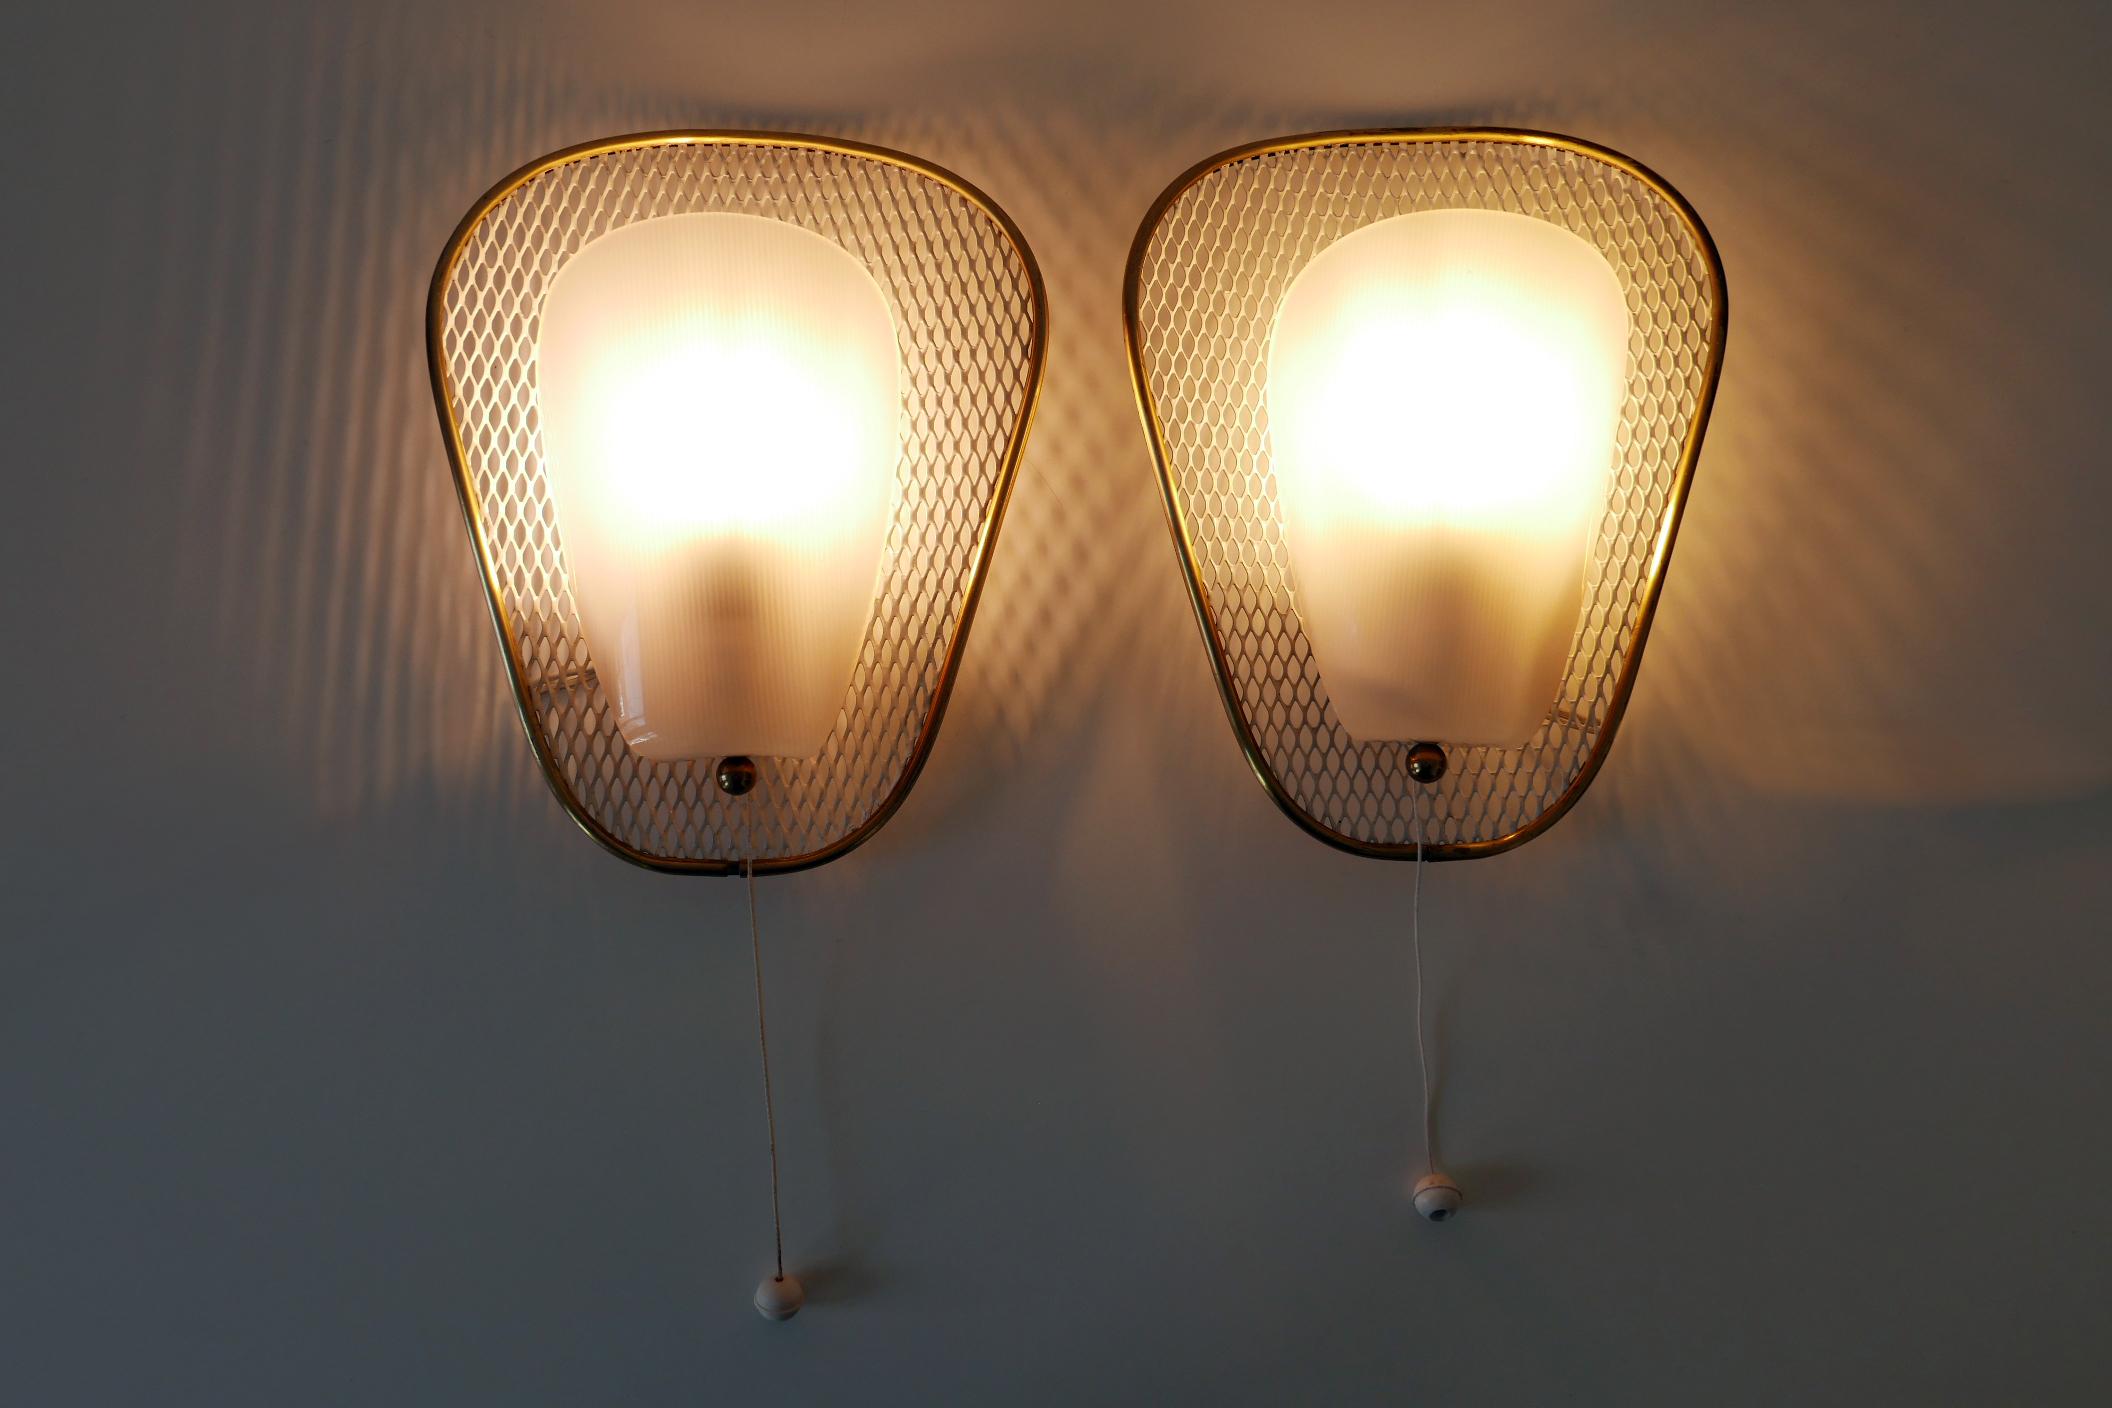 Set of two rare, elegant and highly decorative Mid-Century Modern sconces or wall fixtures. Designed & manufactured in Germany, 1950s.

Executed in brass, metal and plastic, each sconce is executed with 1 x E14 / E12 Edison screw fit bulb socket, is